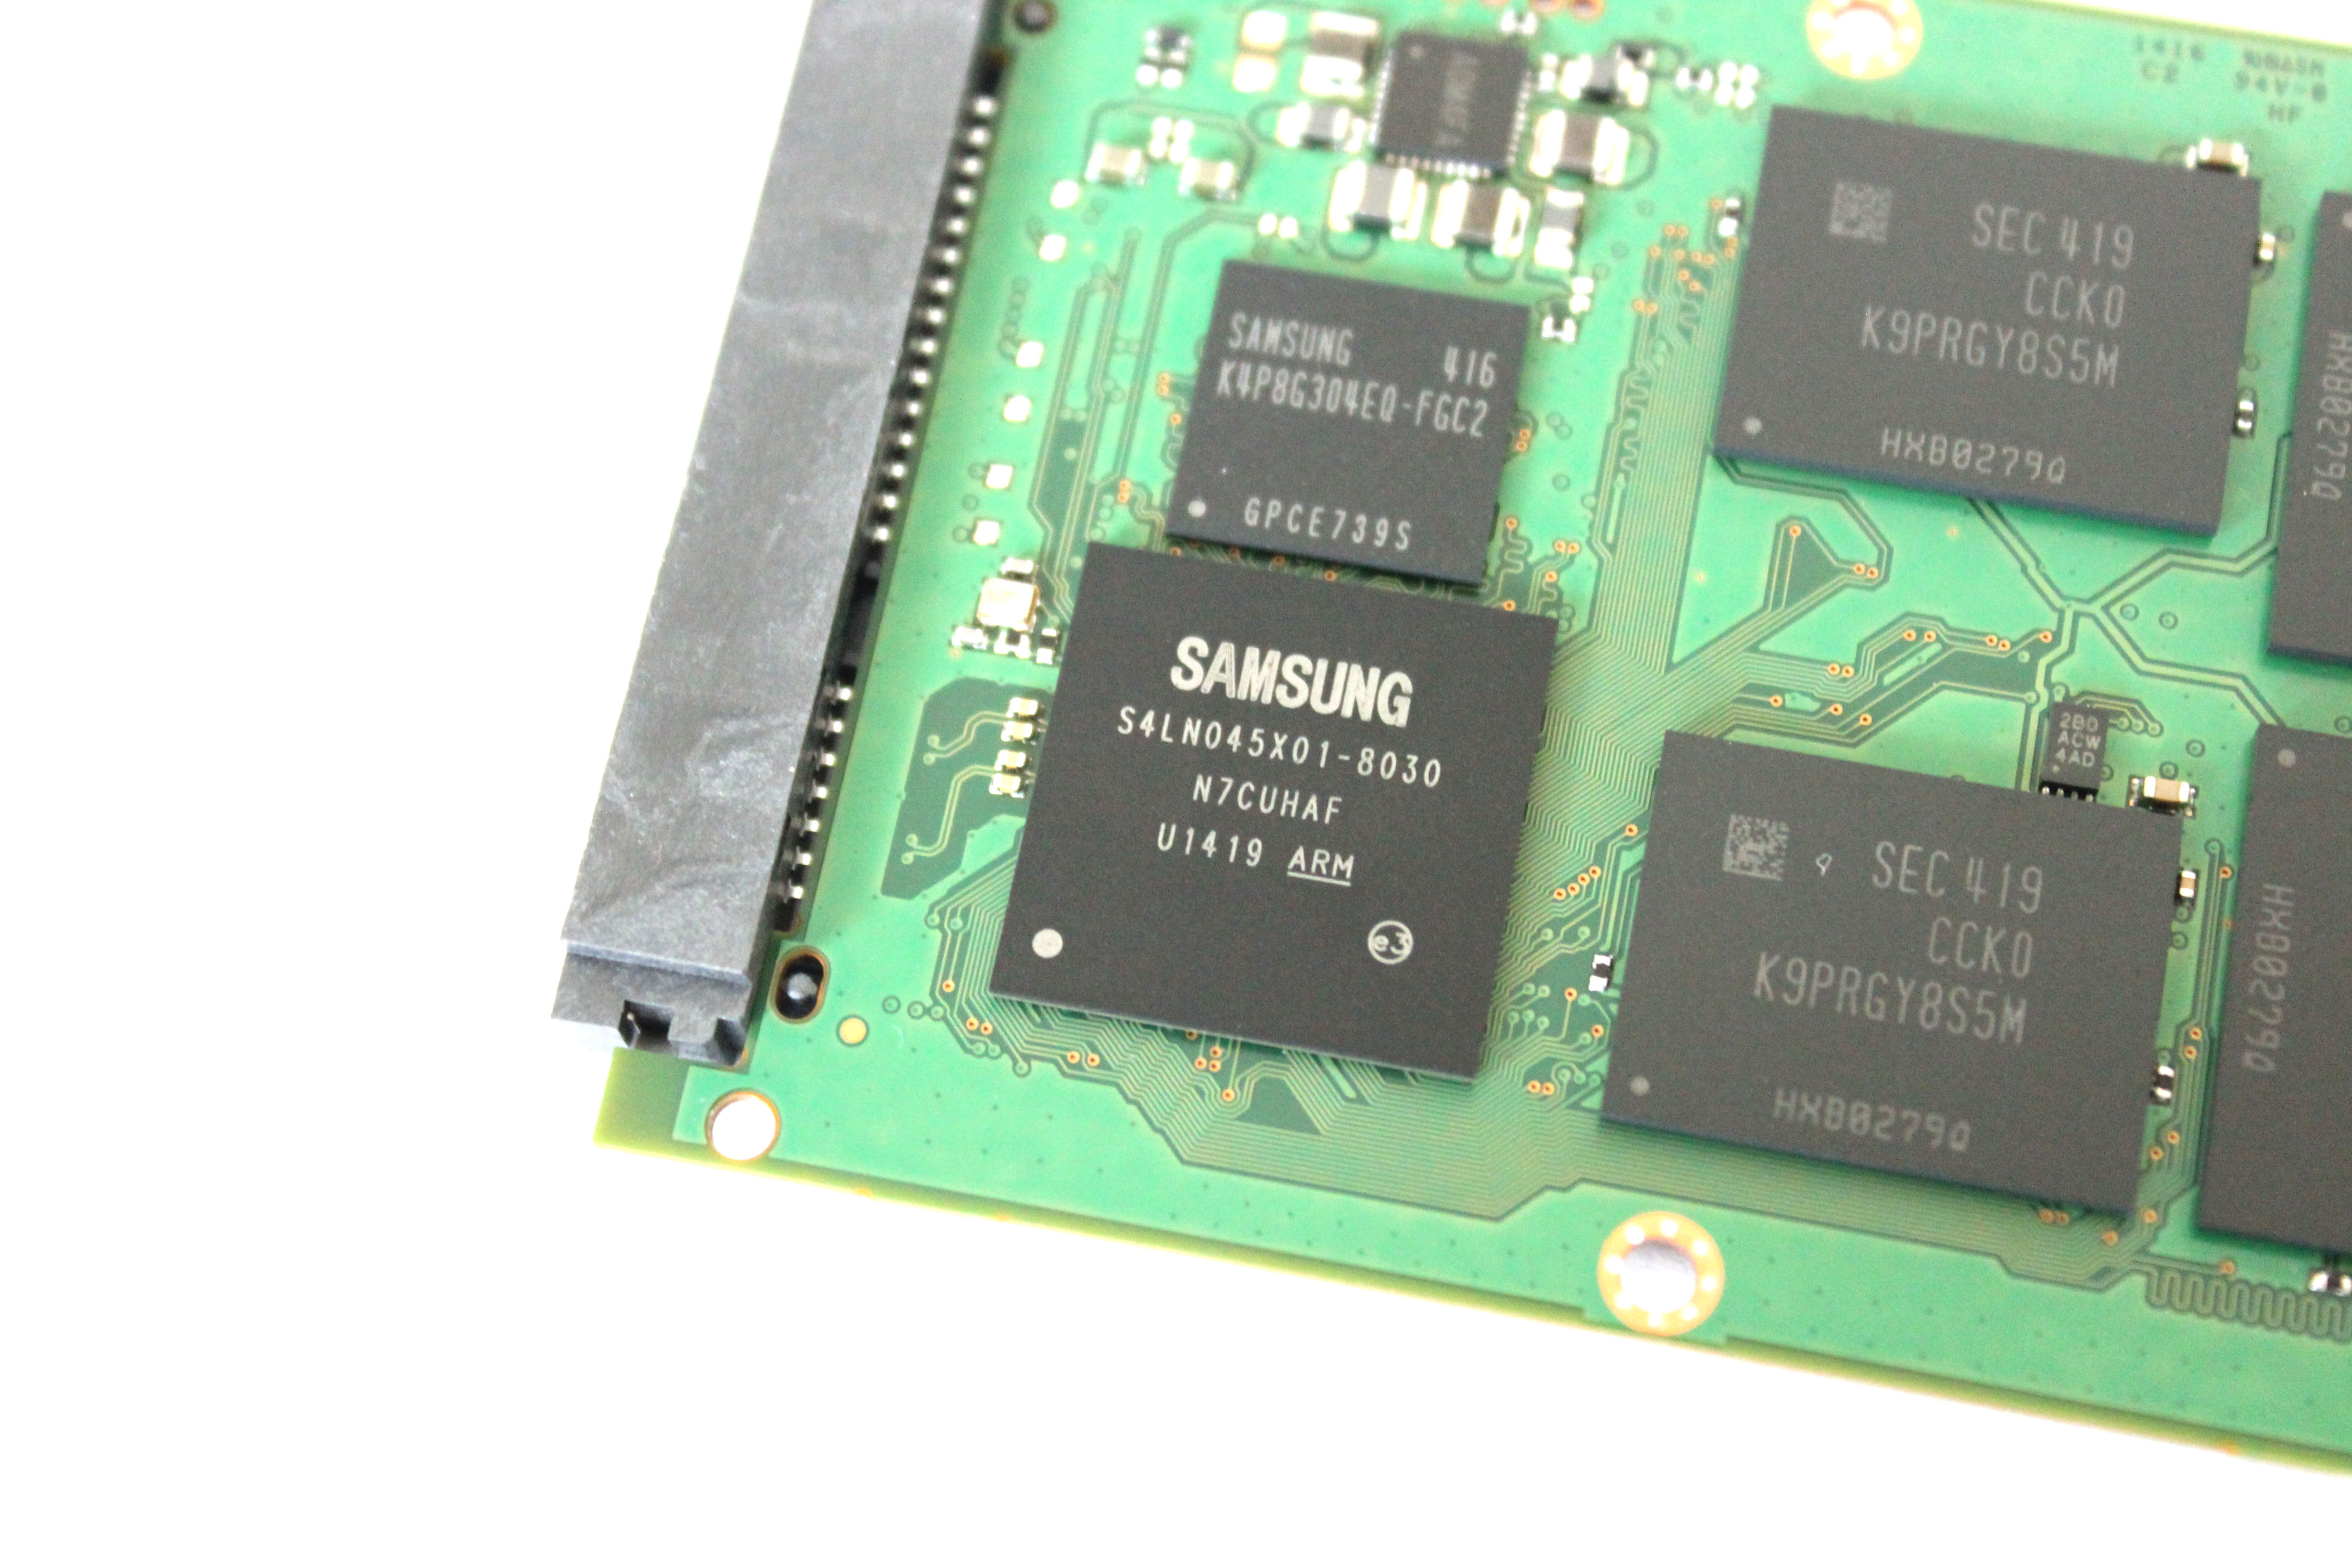 Samsung SSD 850 Pro (128GB, 256GB & 1TB) Review: Enter the ...